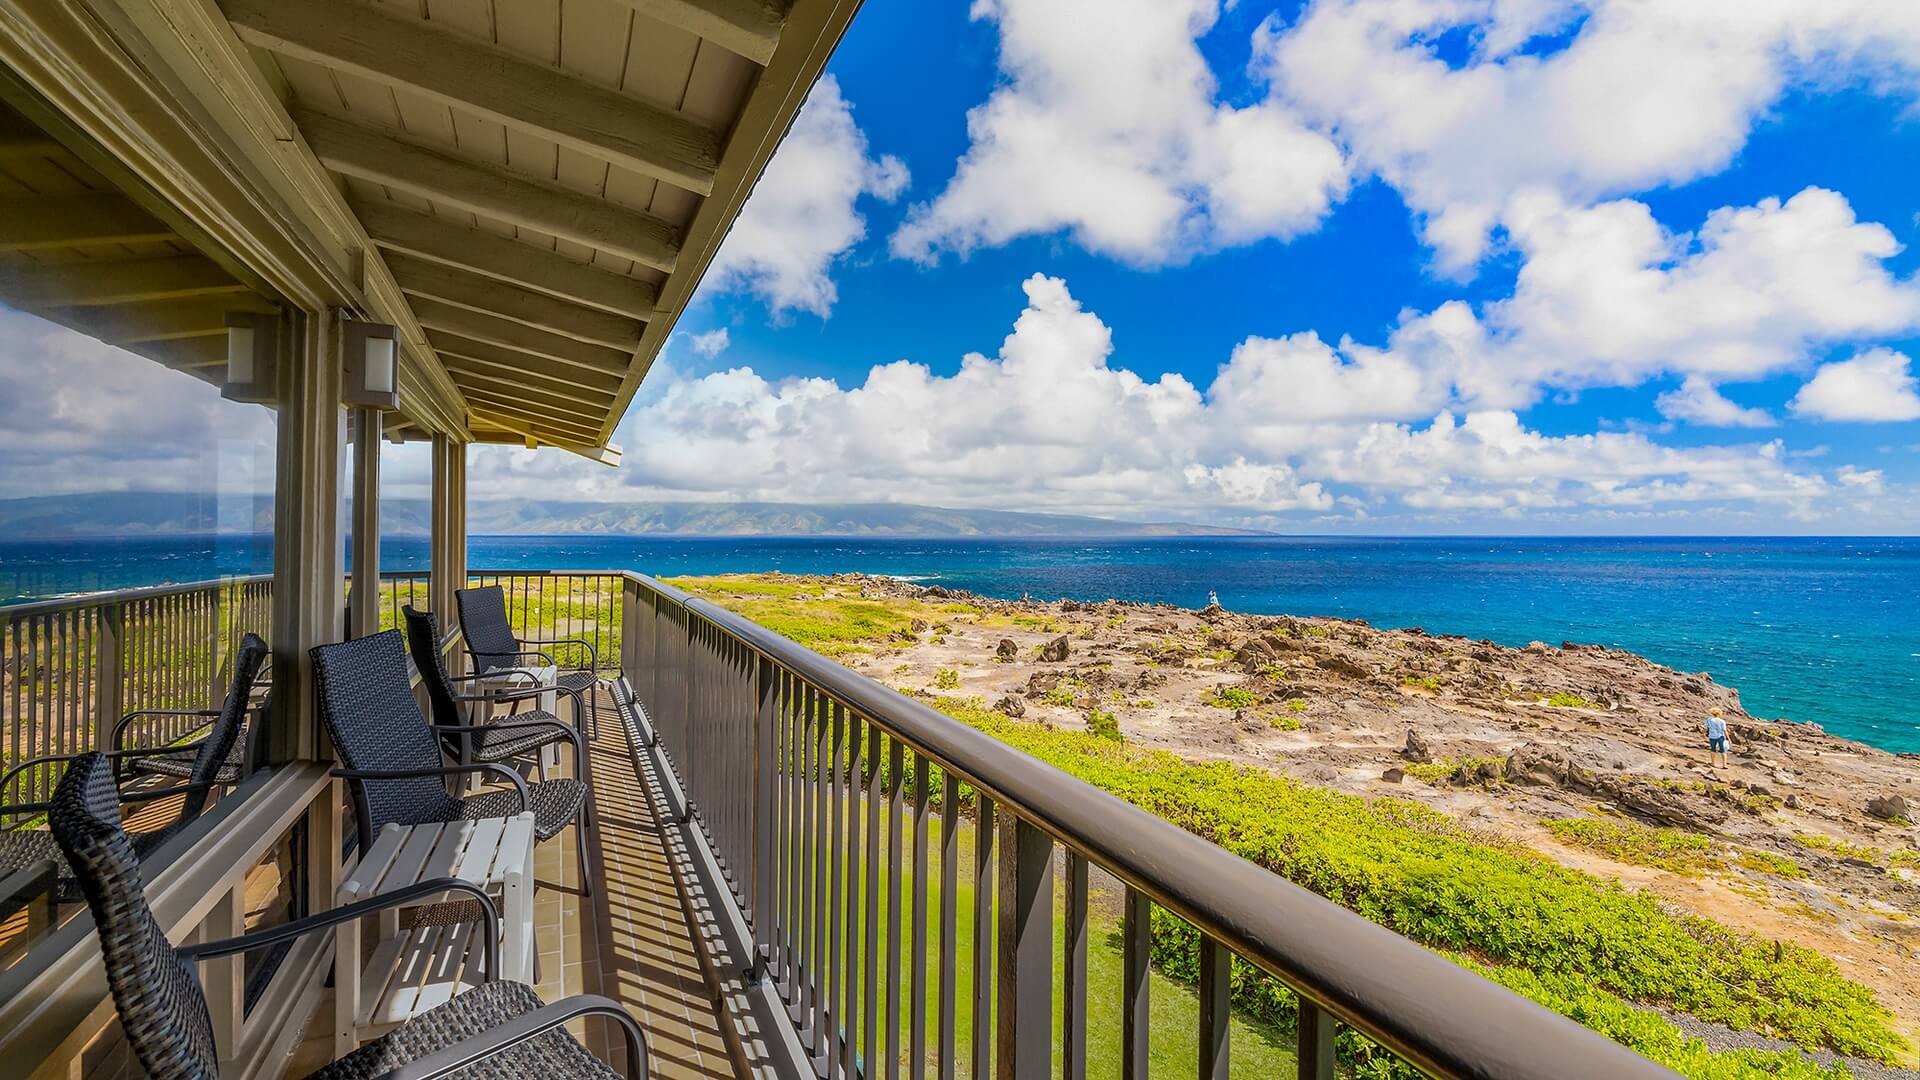 The amazing oceanfront view from Kapalua Bay Villa 34B2